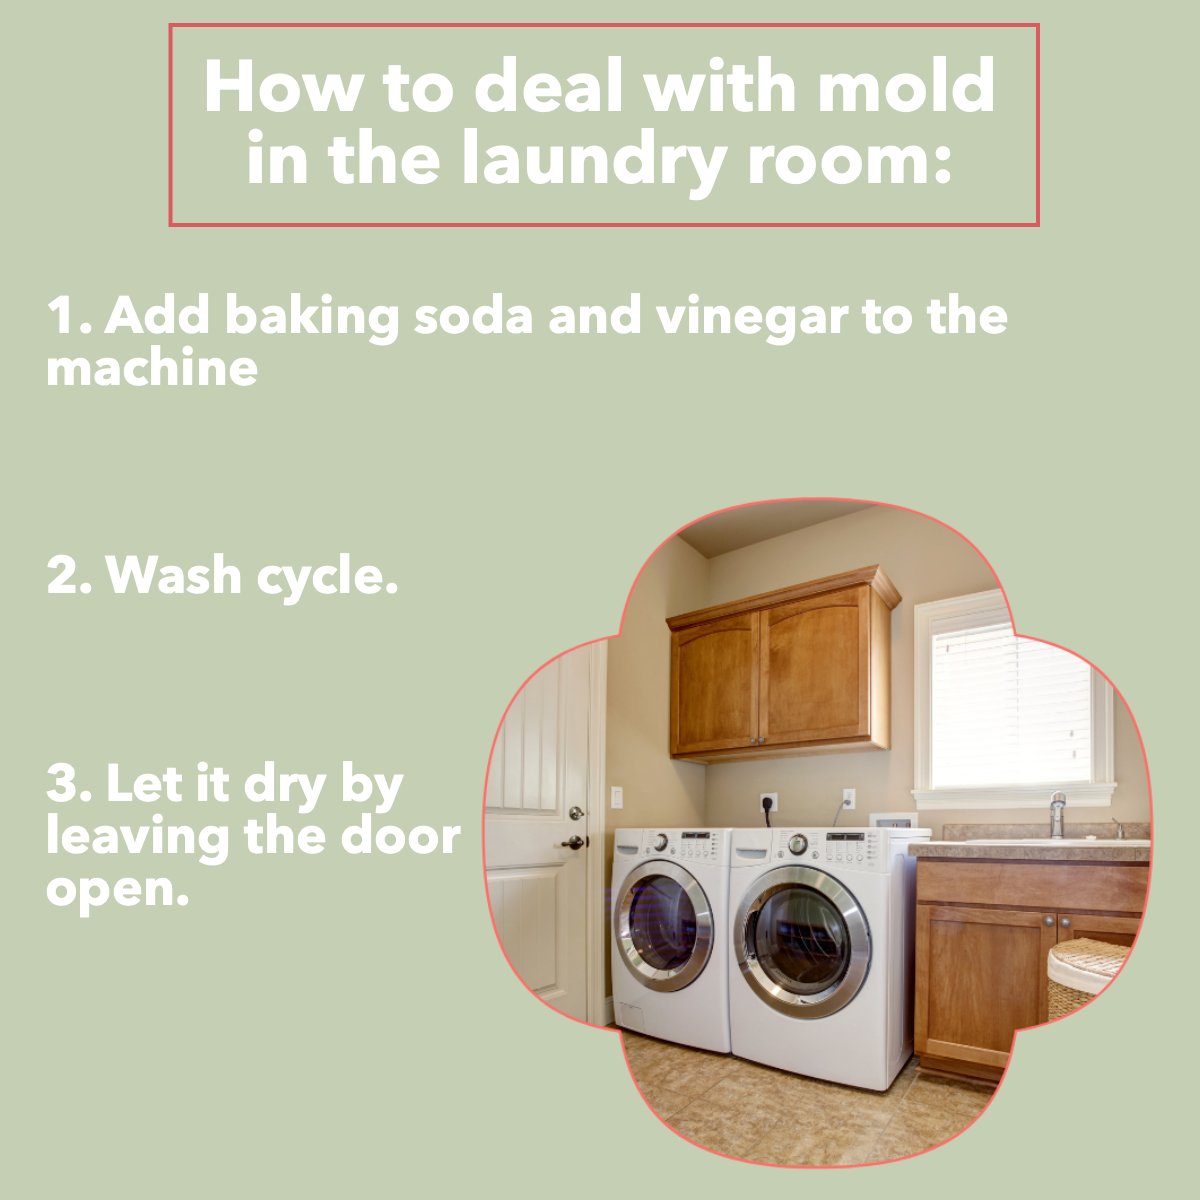 Tired to deal with mold in your laundry room😫 check tips below 🧺

#laundryroom #laundryroomgoals #laundryroomhacks #cleanhouse